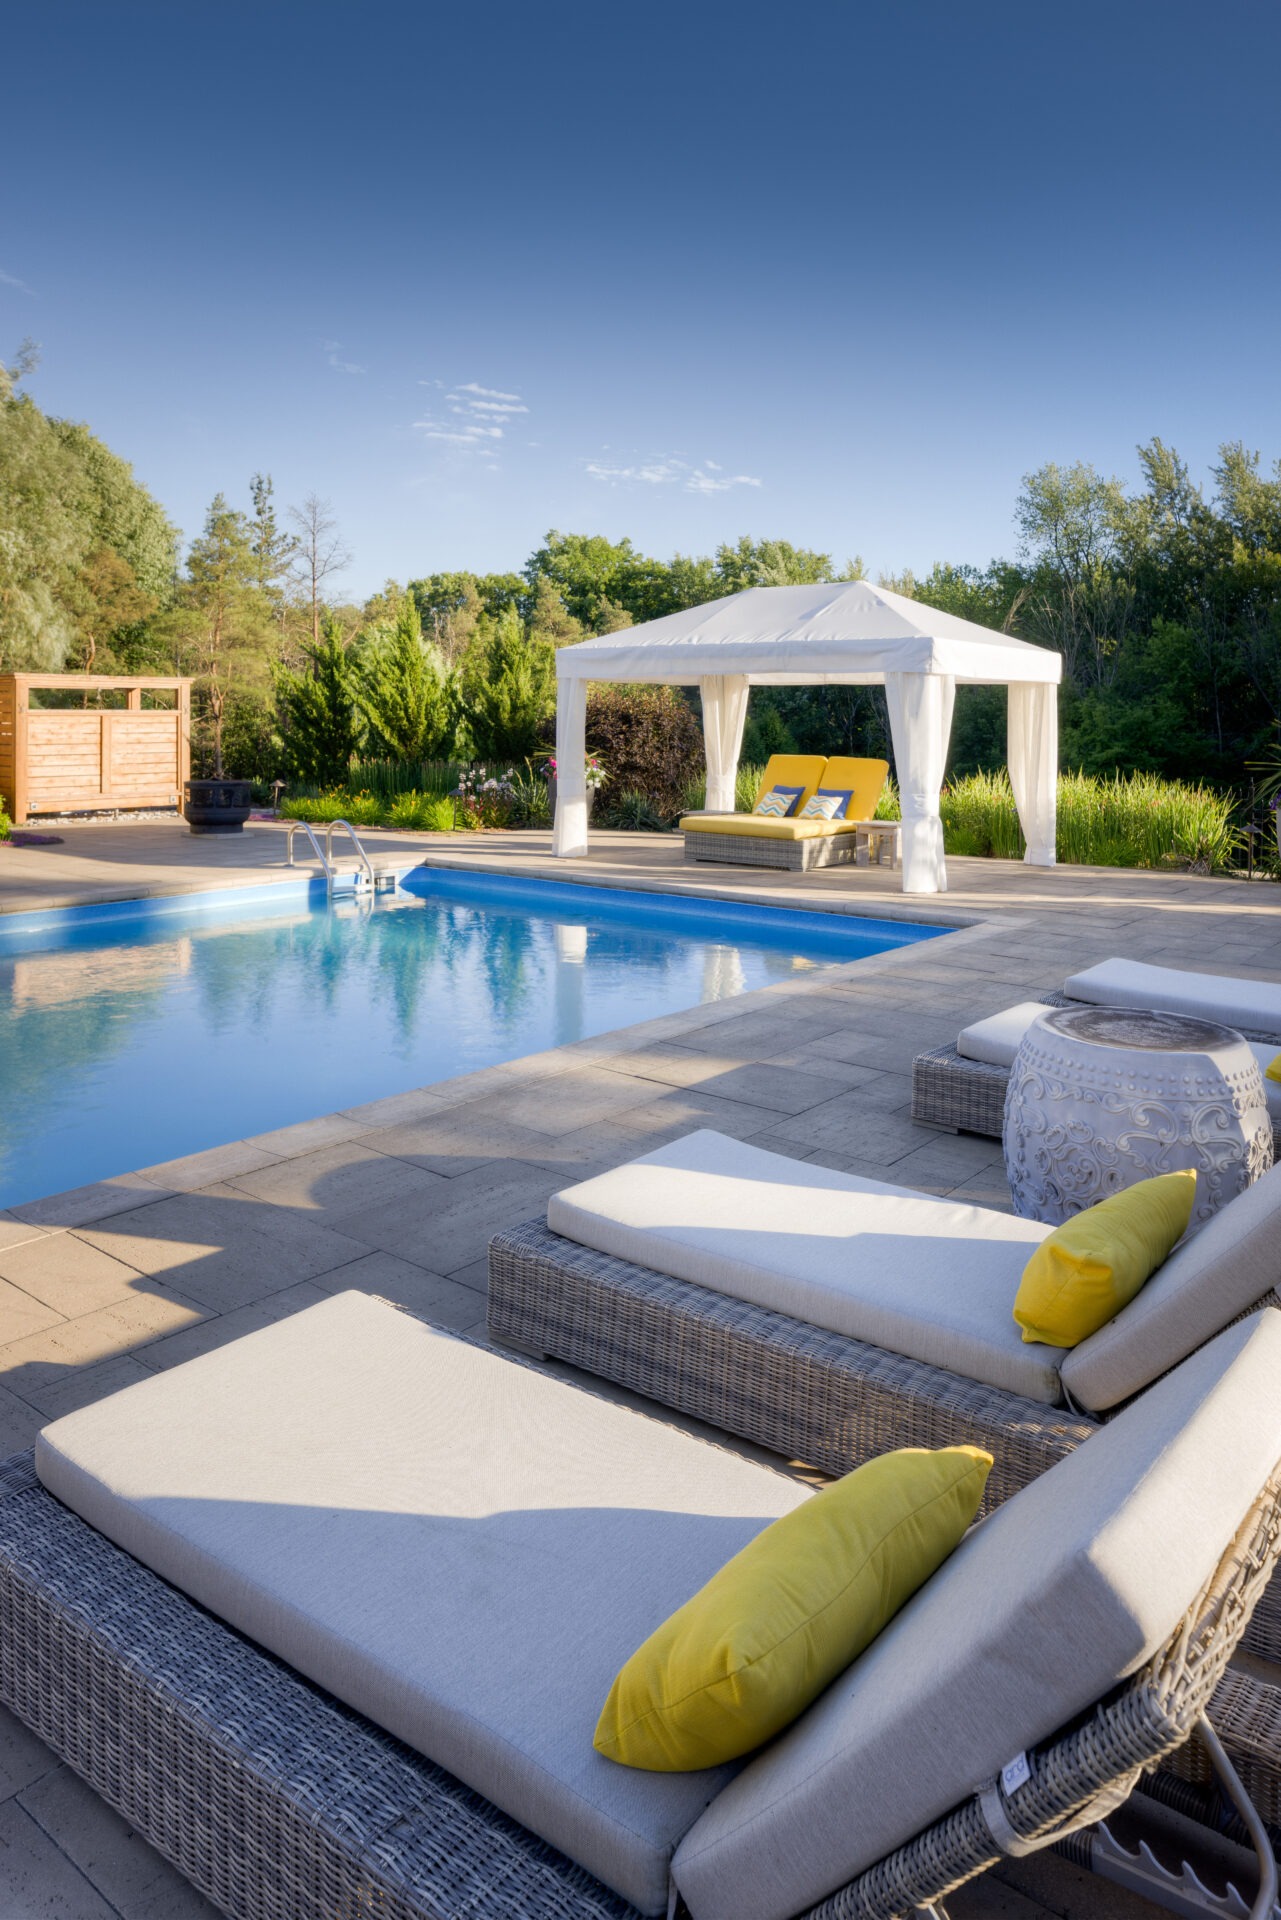 Luxurious outdoor pool surrounded by lounge chairs and a canopy bed, with lush greenery under a clear blue sky, suggesting a tranquil private retreat.